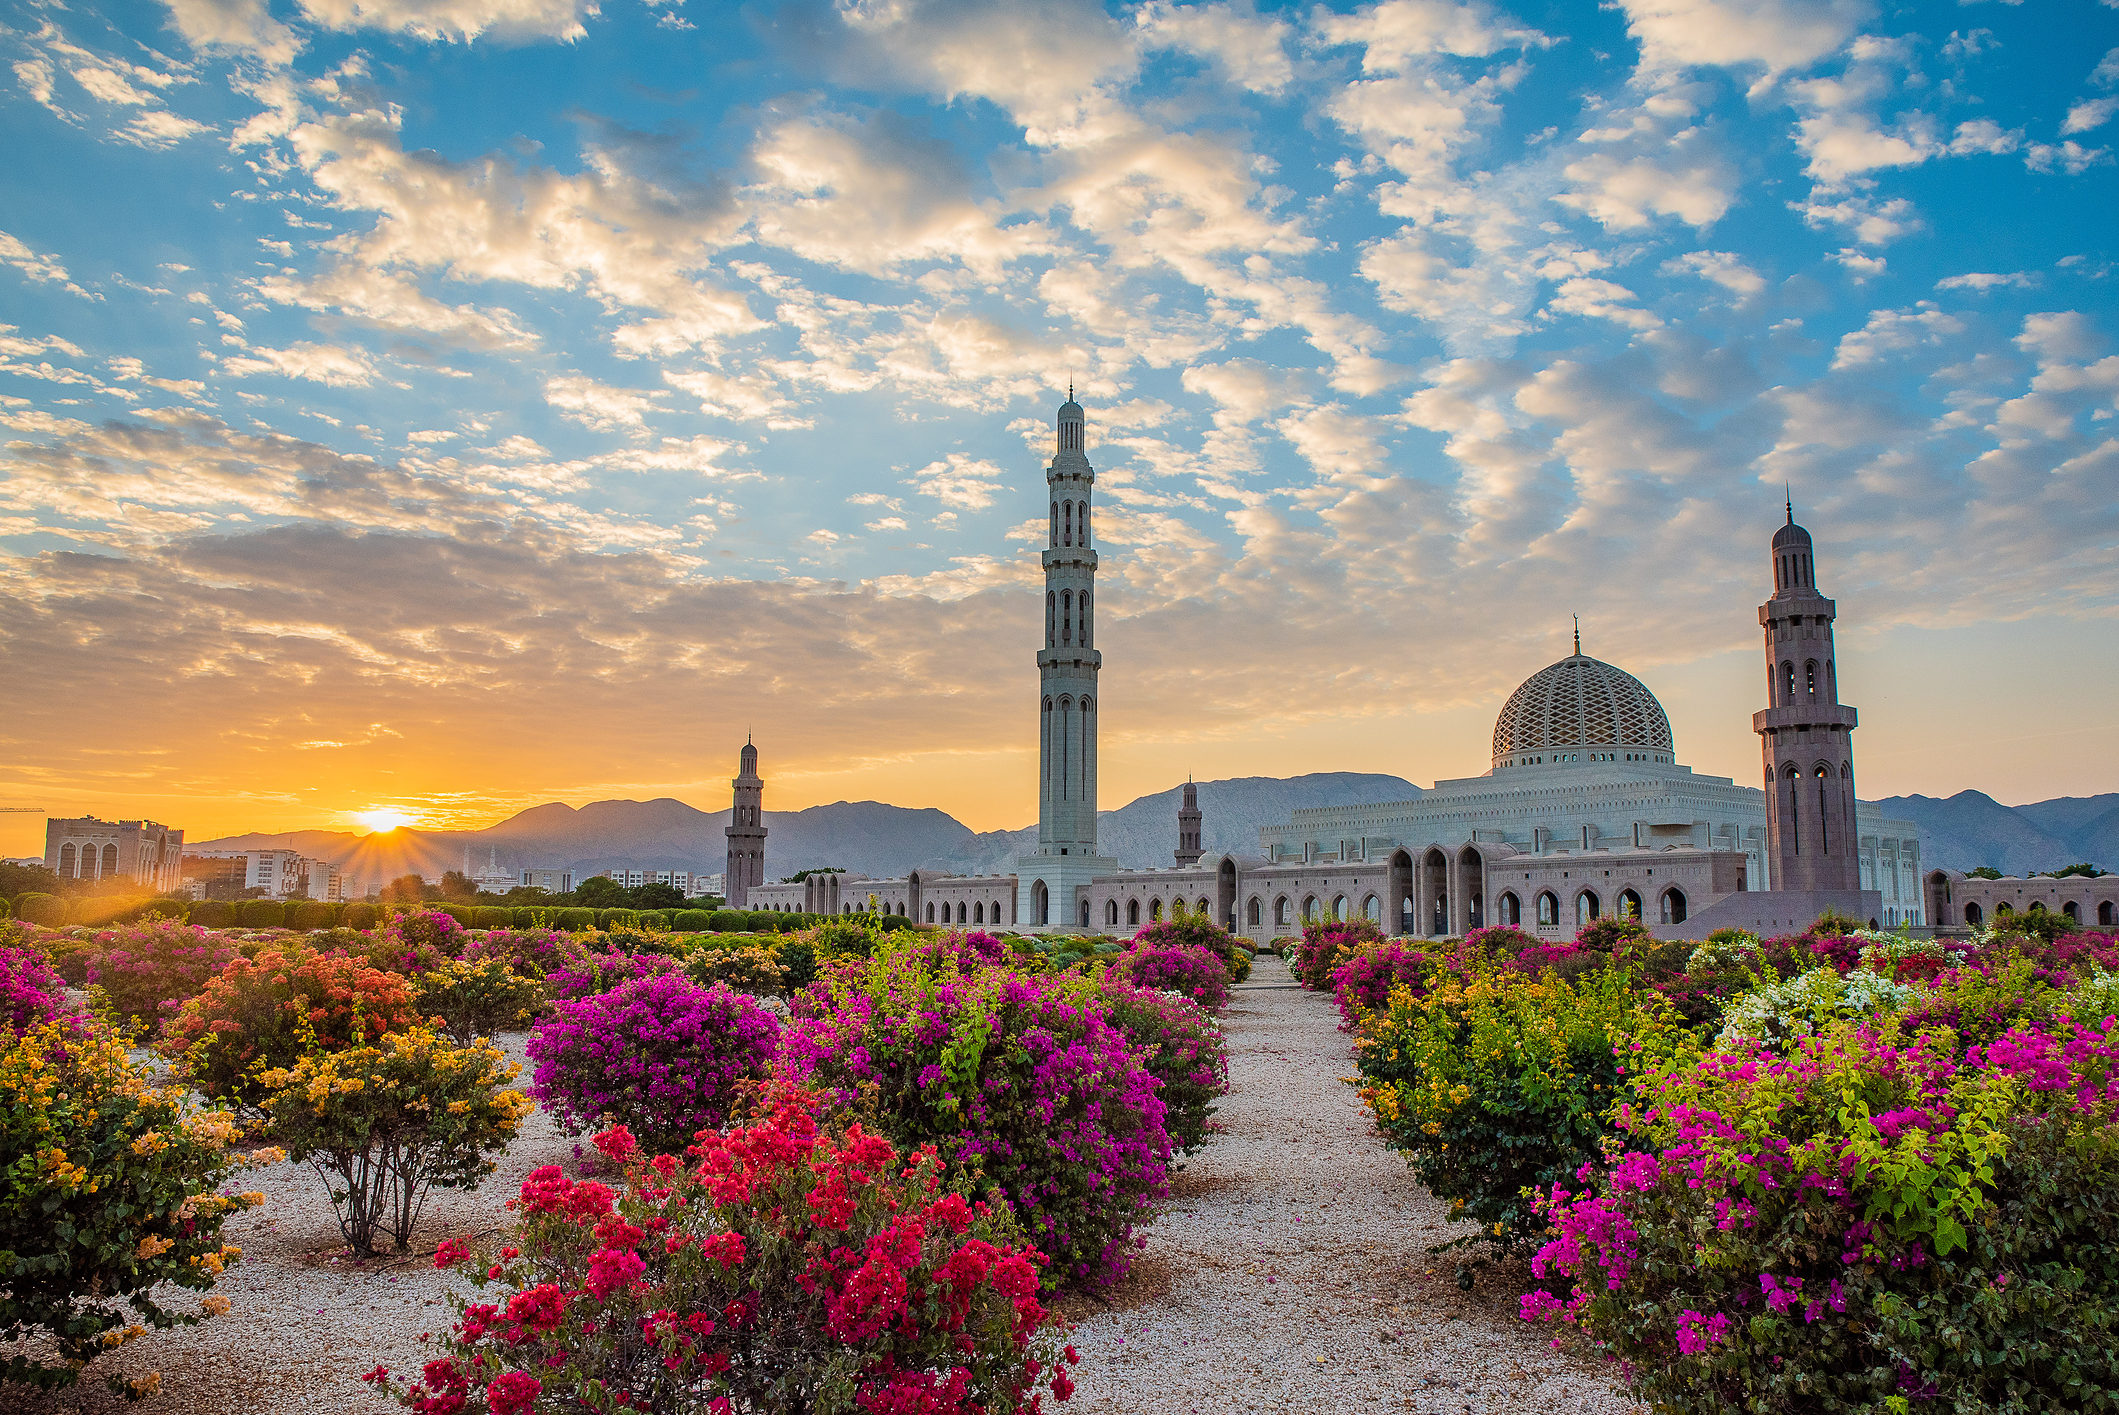 Grand mosque at muscat